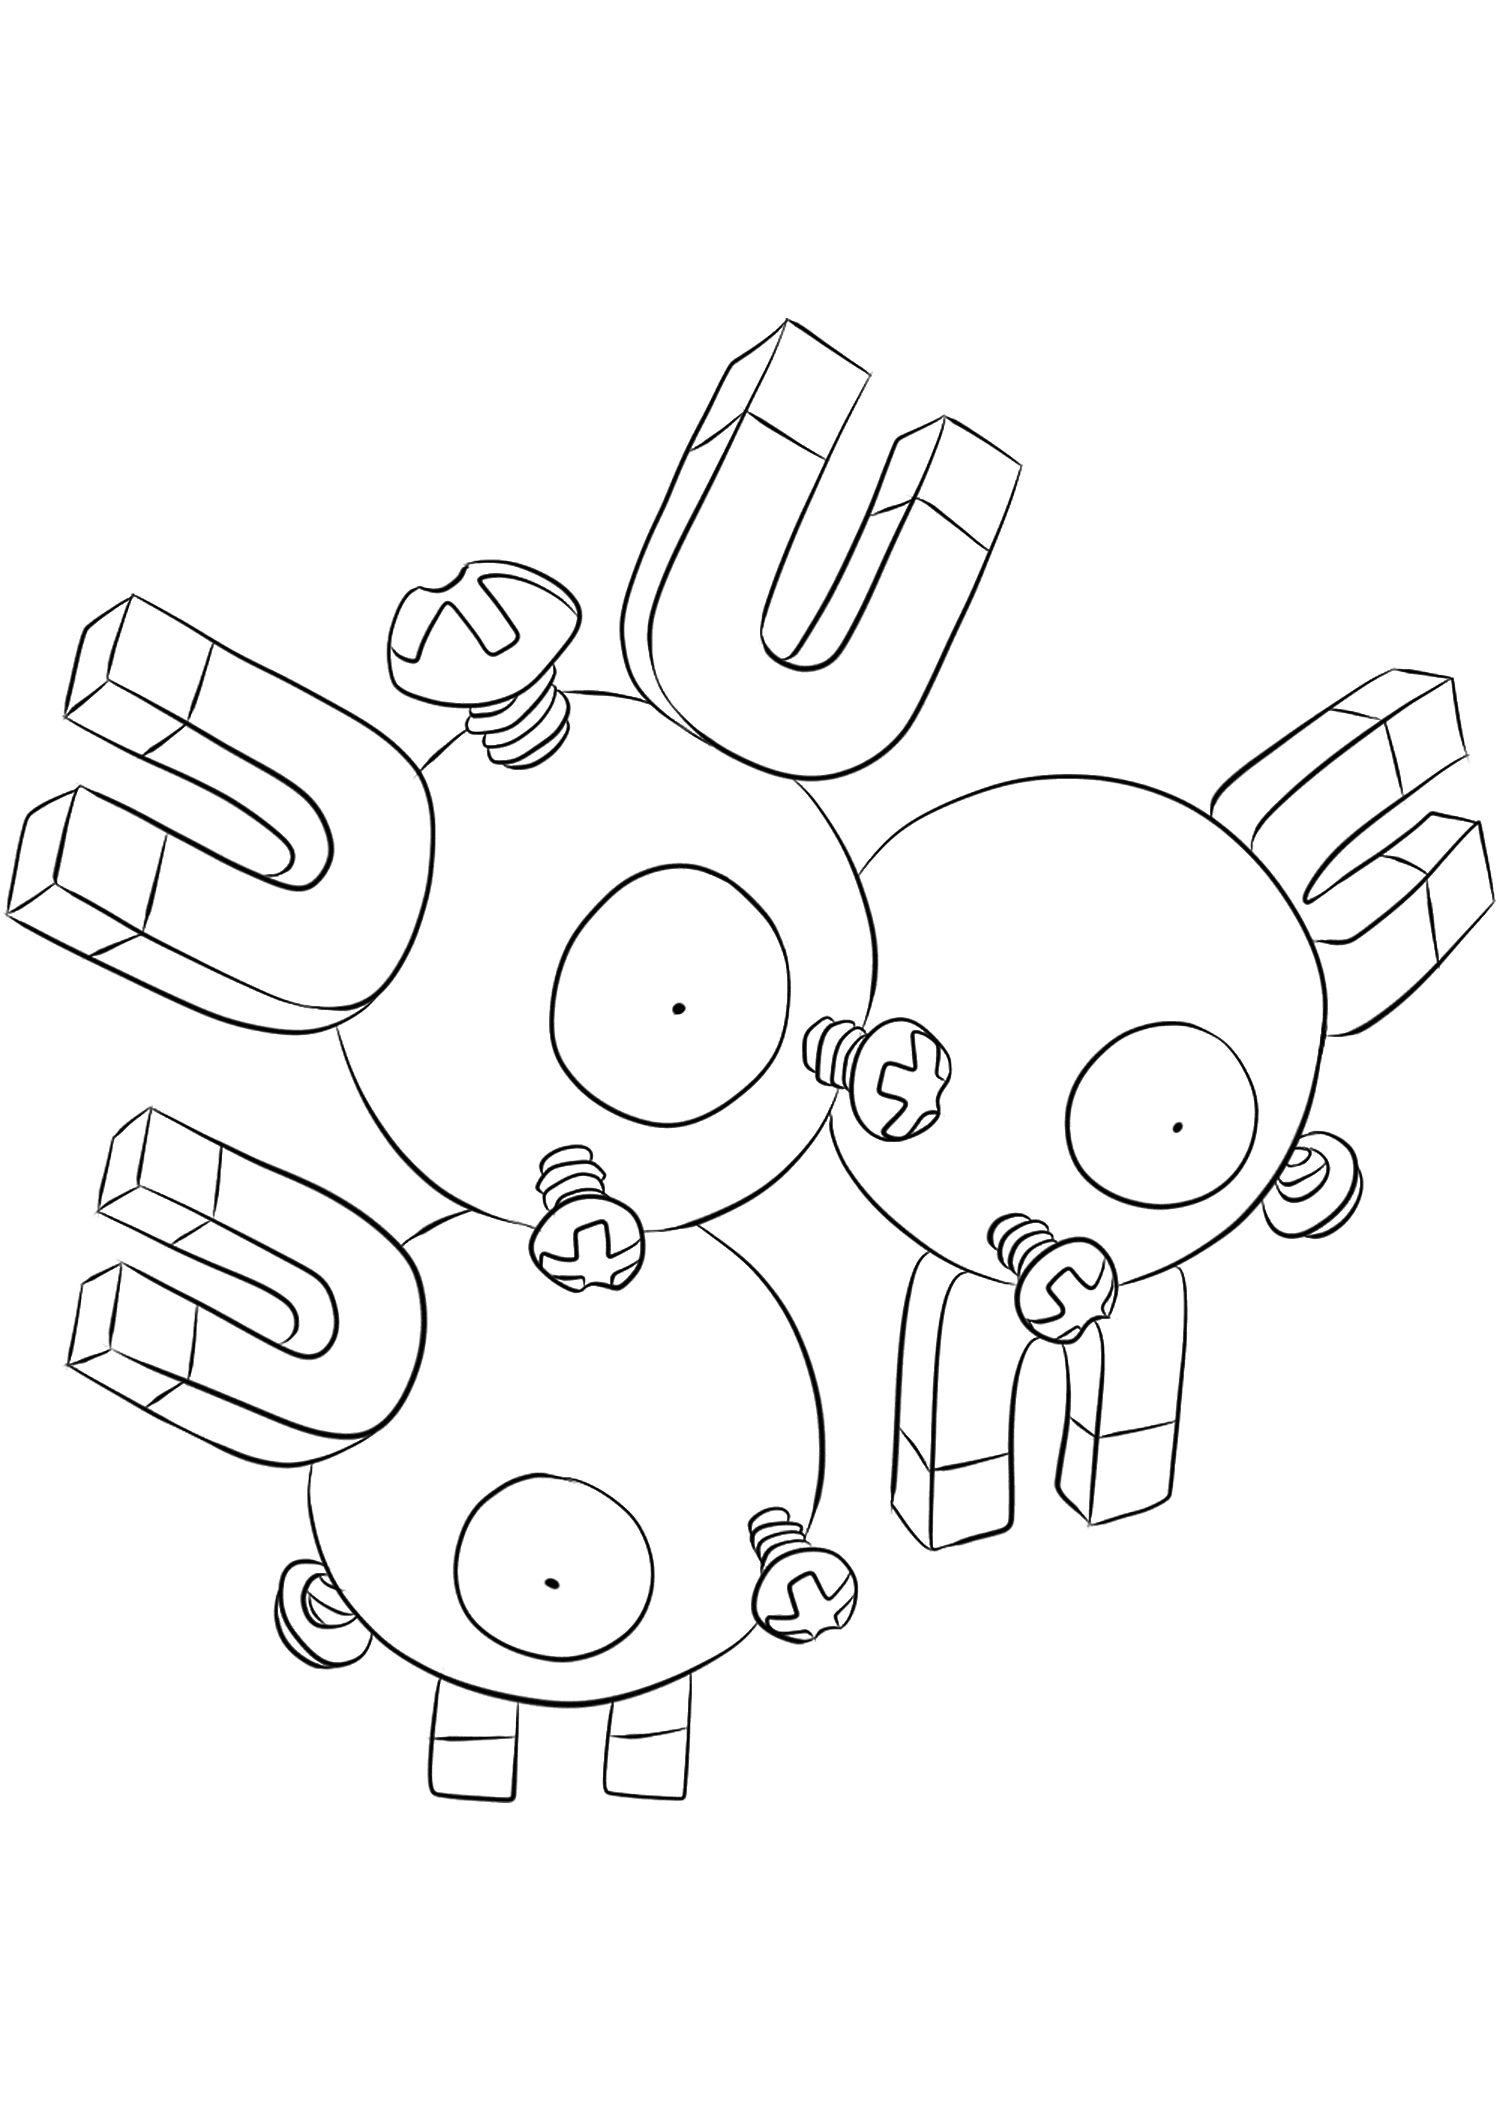 Magneton (No.82). Magneton Coloring page, Generation I Pokemon of type Electrik and SteelOriginal image credit: Pokemon linearts by Lilly Gerbil on Deviantart.Permission:  All rights reserved © Pokemon company and Ken Sugimori.